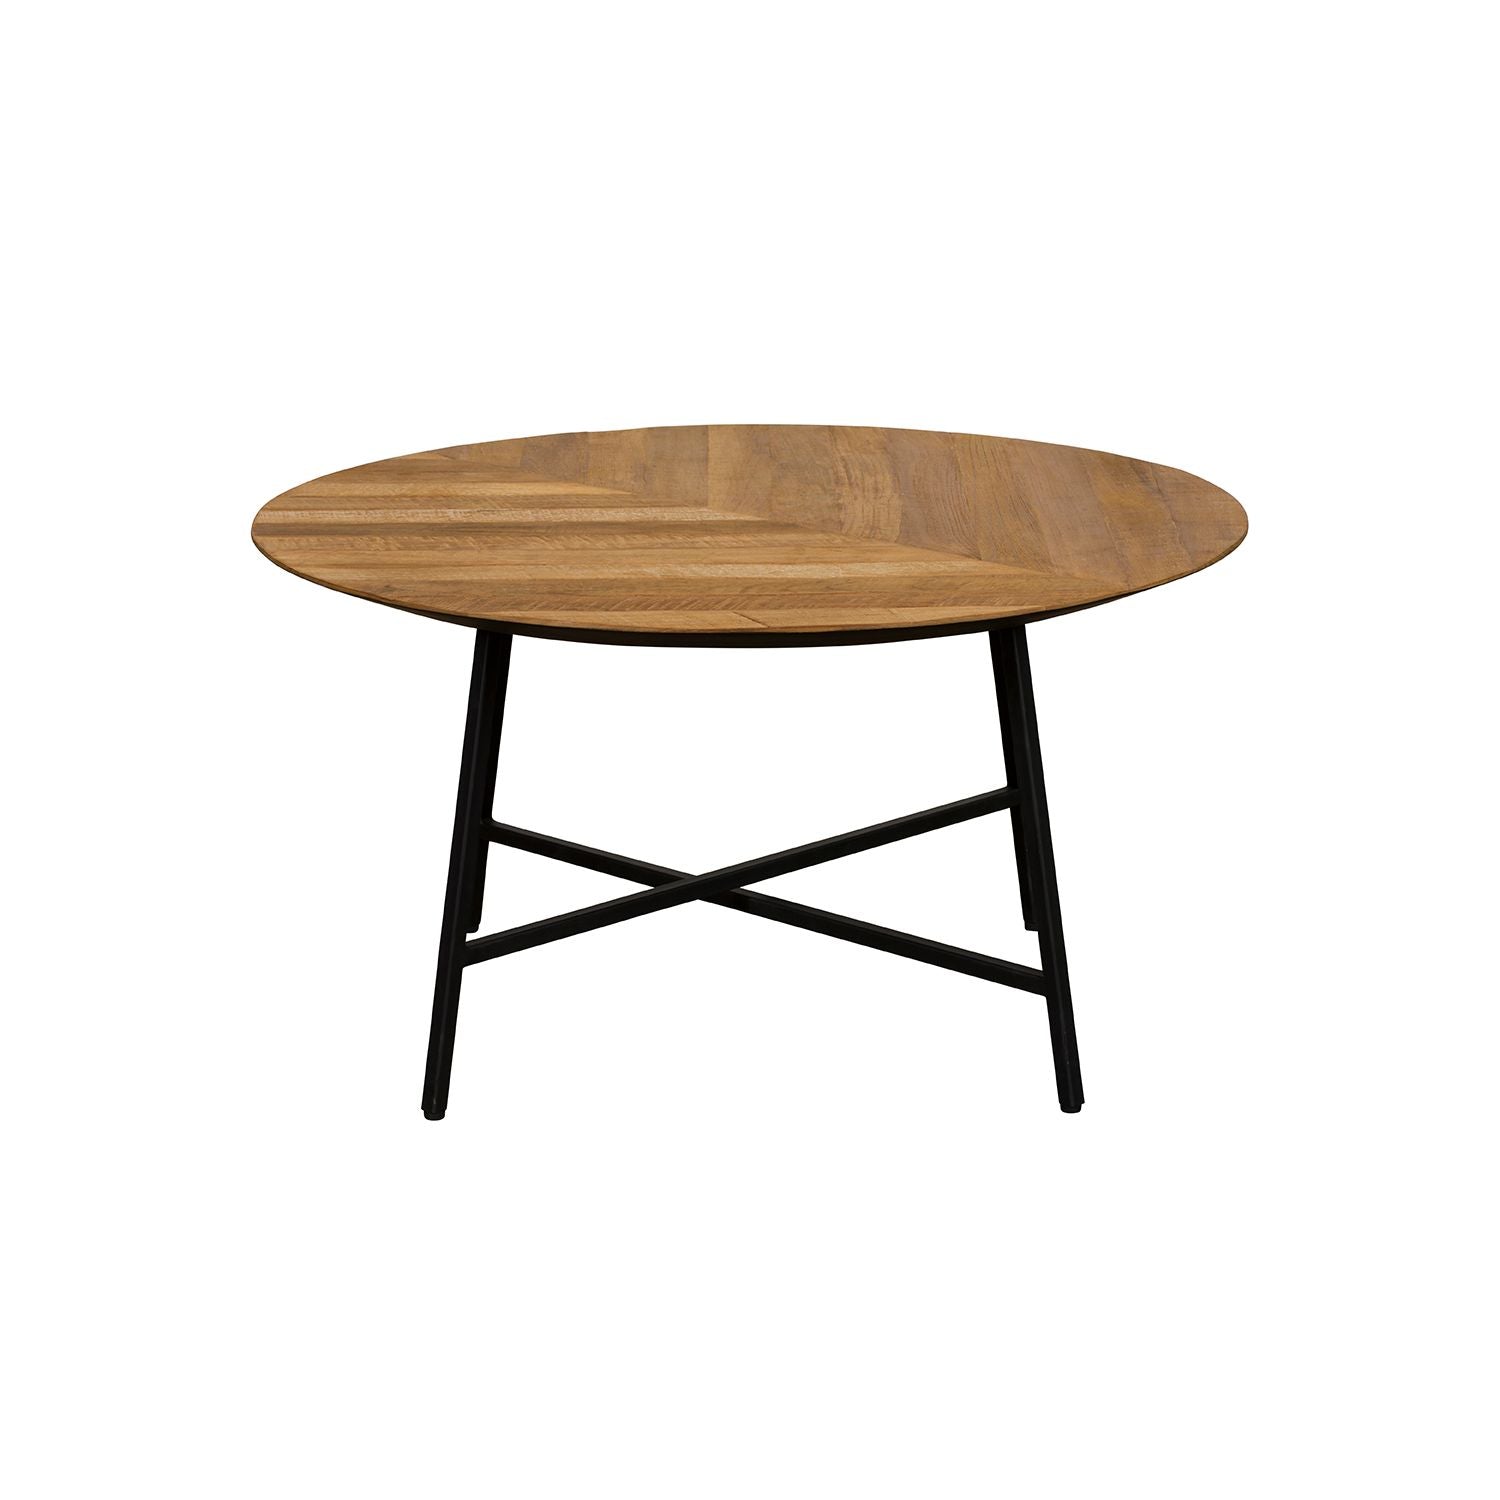 Coffee Table - Round